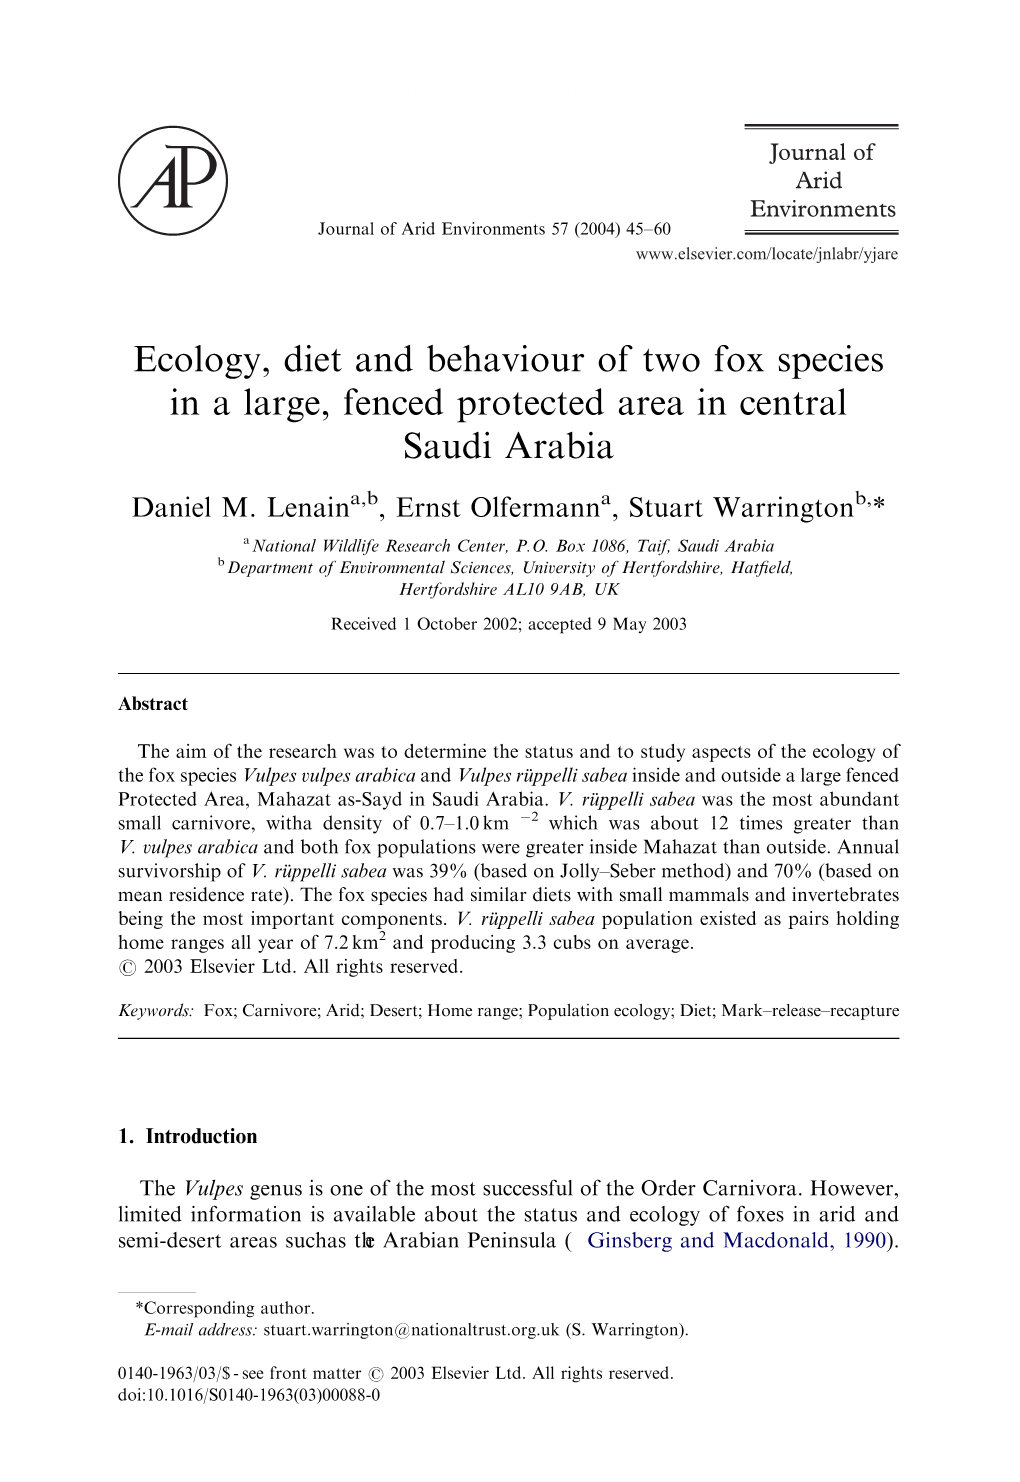 Ecology, Diet and Behaviour of Two Fox Species in a Large, Fenced Protected Area in Central Saudi Arabia